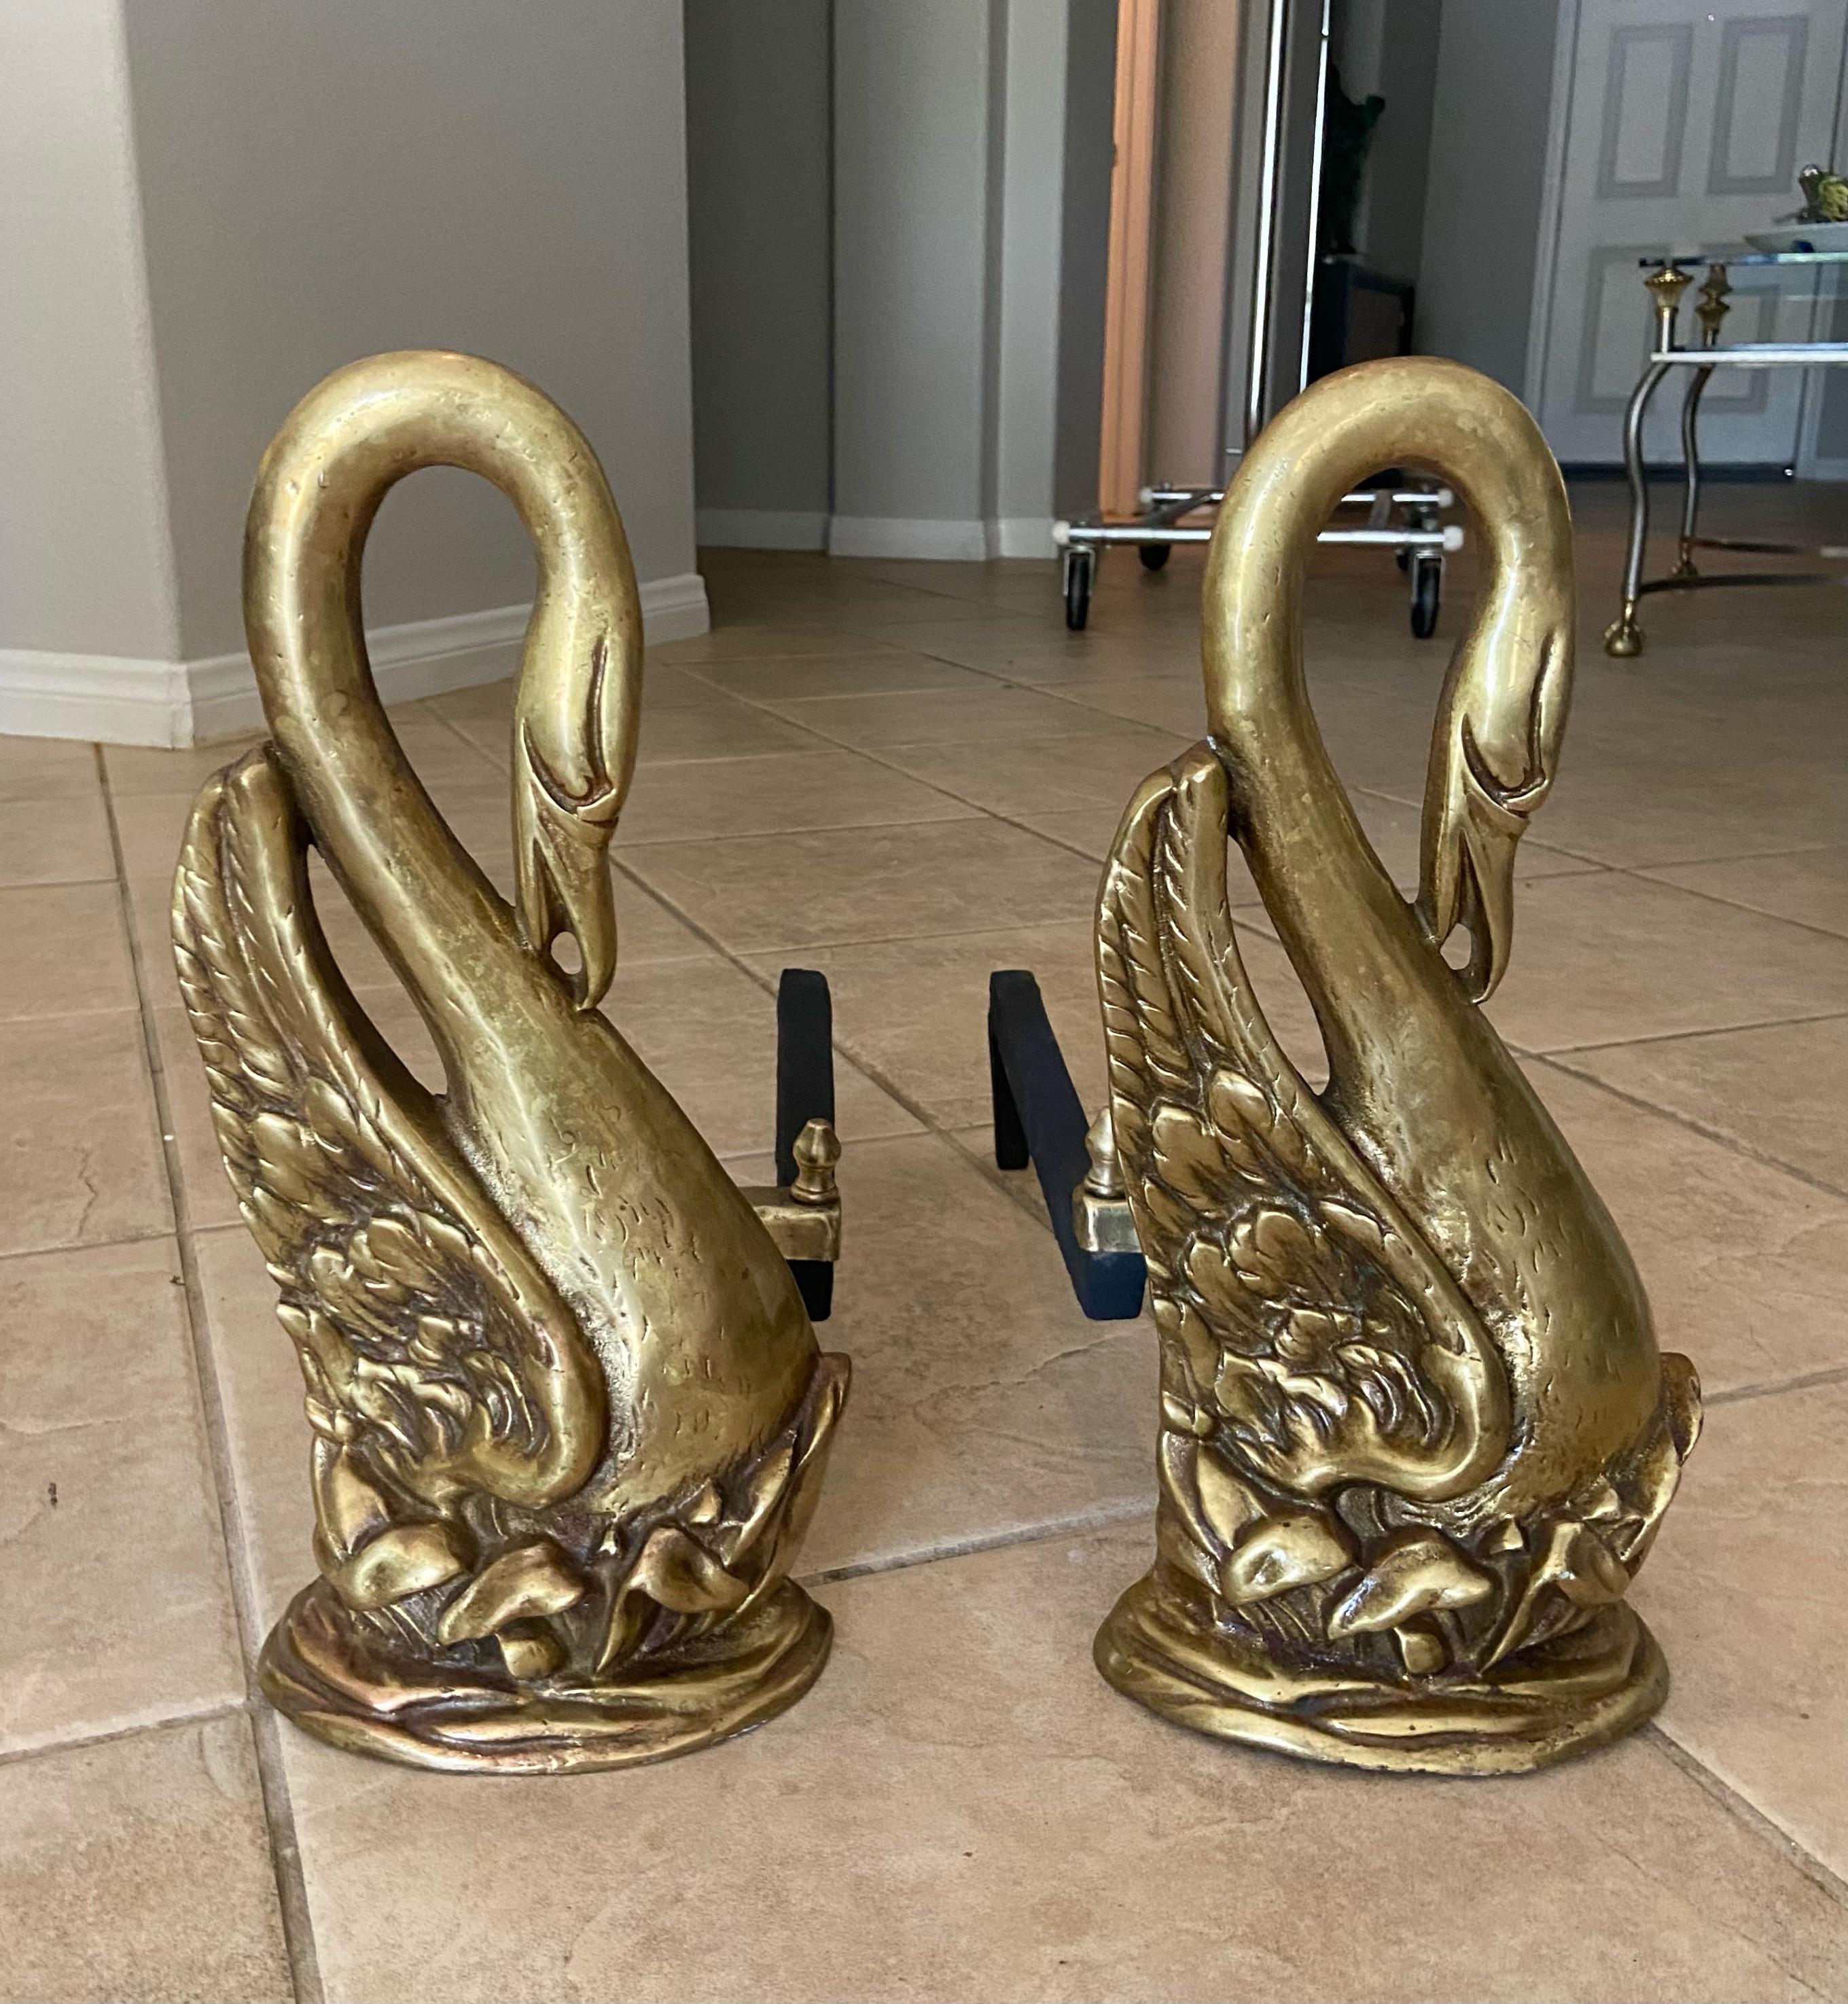 Pair of solid brass antique swan motif fireplace andirons. Very old with nice patina to brass.